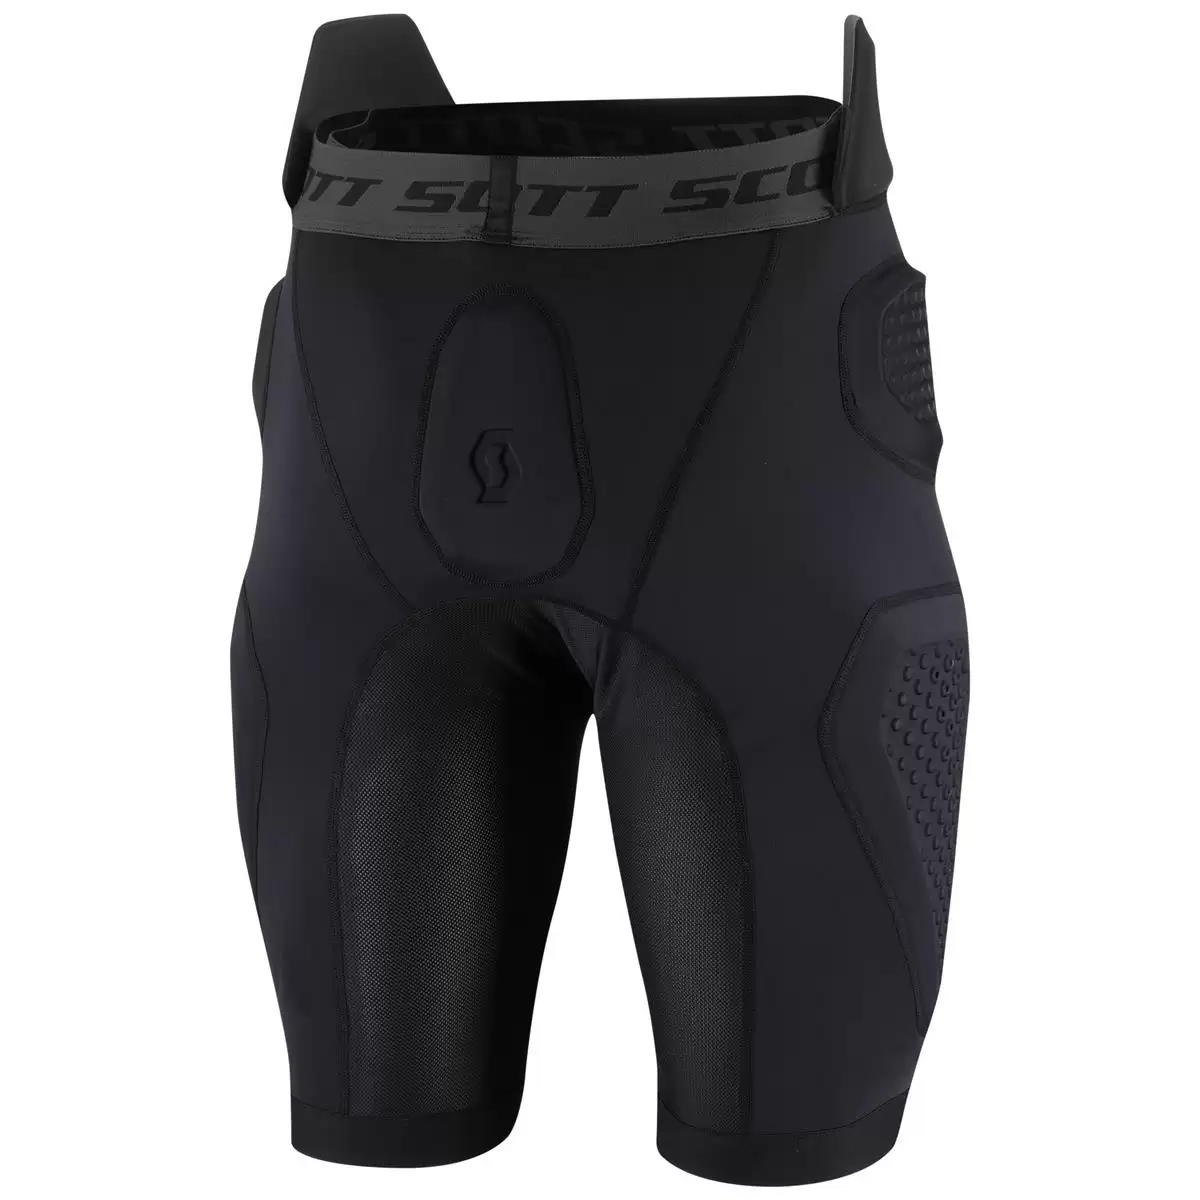 Short protector Softcon air black - Size M #1